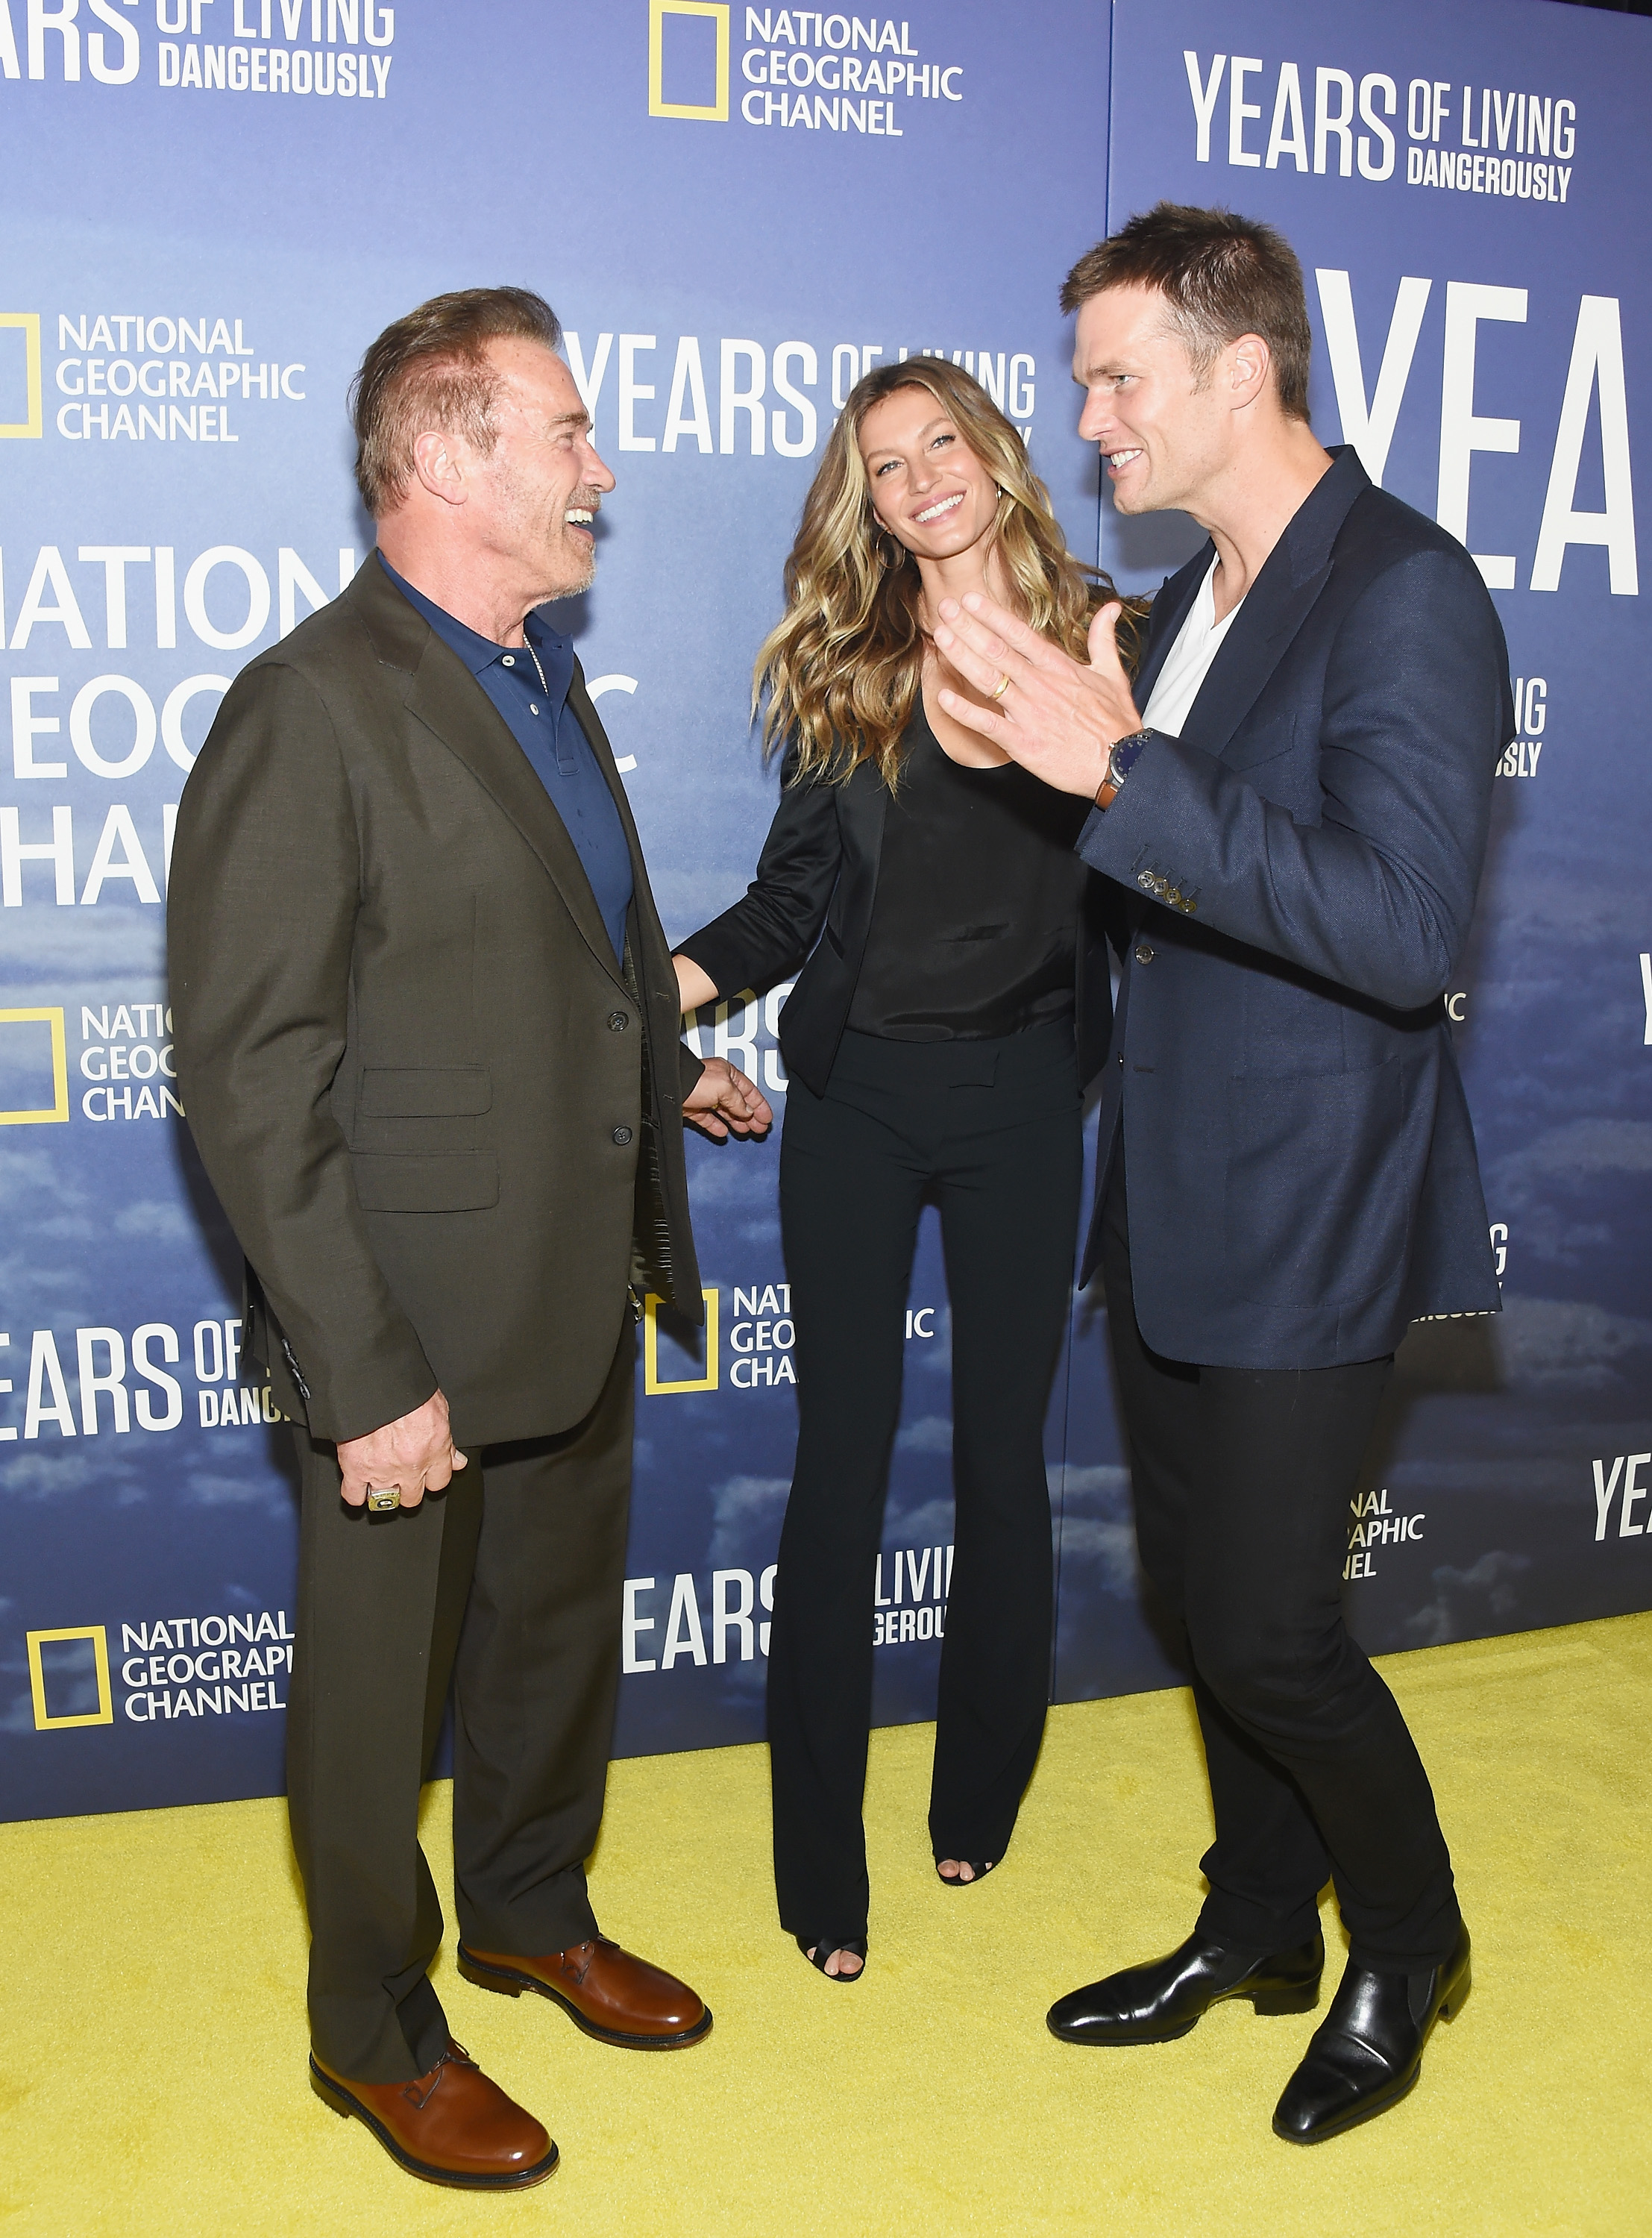 Arnold Schwarzenegger with Tom Brady and Gisele Bundchen (Photo by Michael Loccisano/Getty Images)